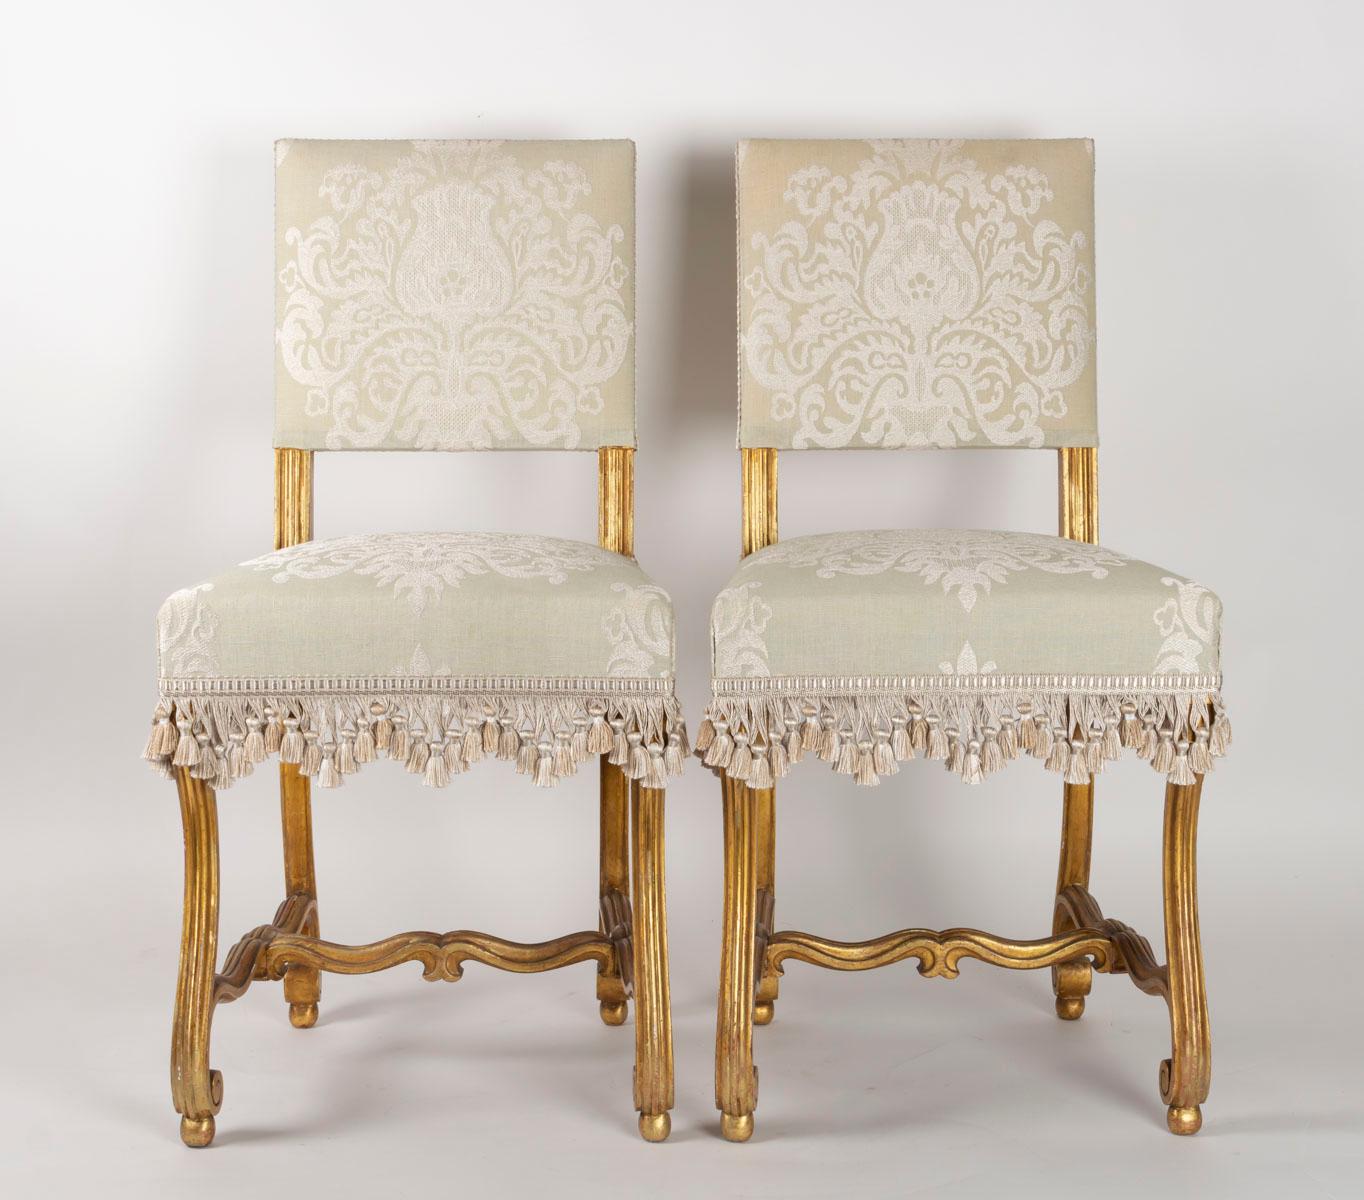 Pair of chairs, sheep bones, carved and gilded wooden, Napoleon III period, new publisher fabric
Measures: H 83 cm, W 41 cm, P 35 cm.